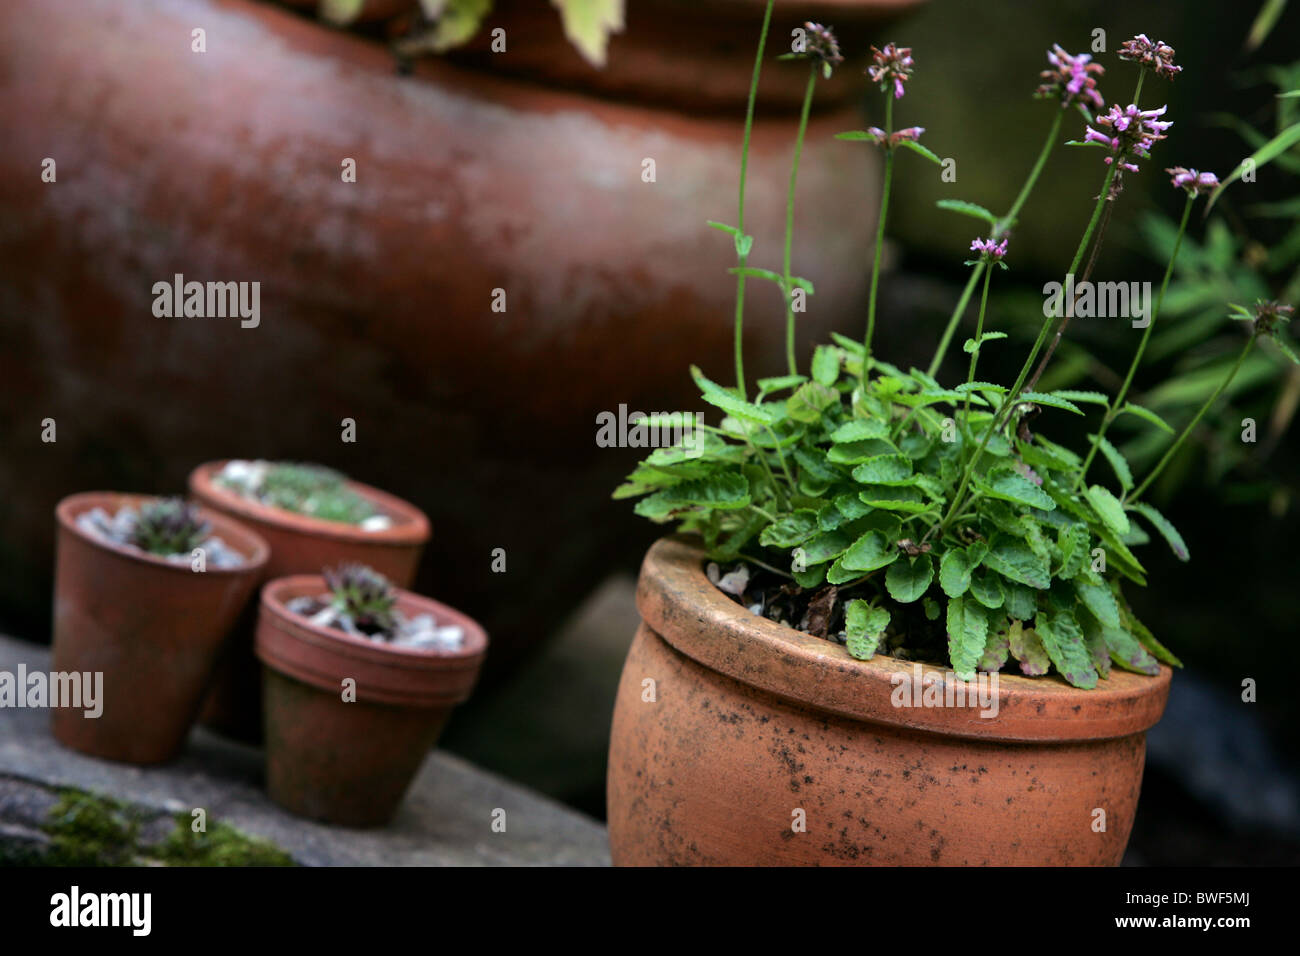 Saxifraga Cochlearis alpine in large pot with alpine sedum in small pots Stock Photo